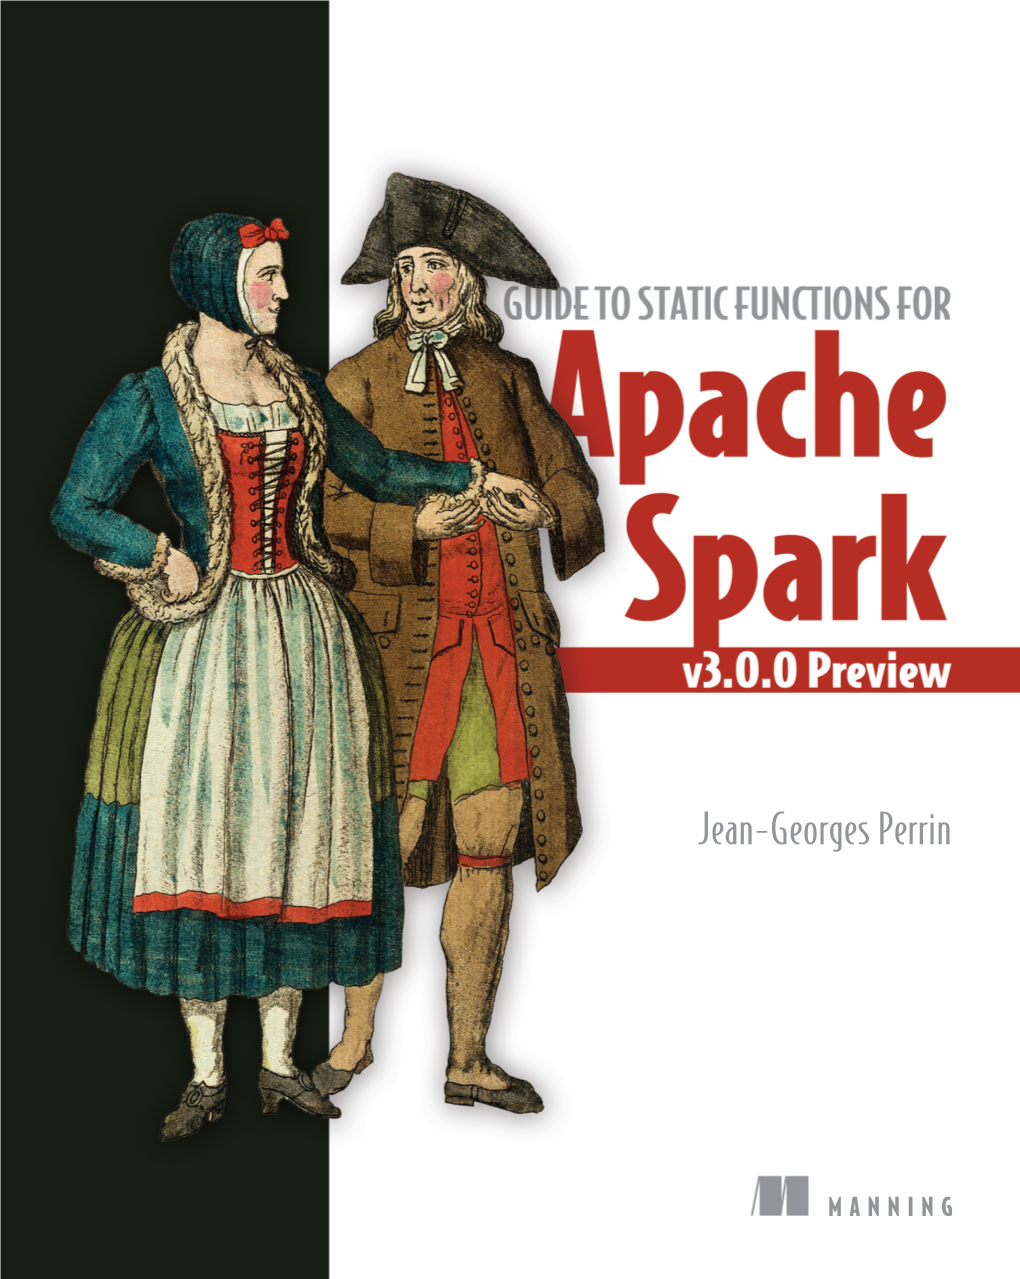 Guide to Static Functions for Apache Spark V3.0.0 Preview Jean-Georges Perrin